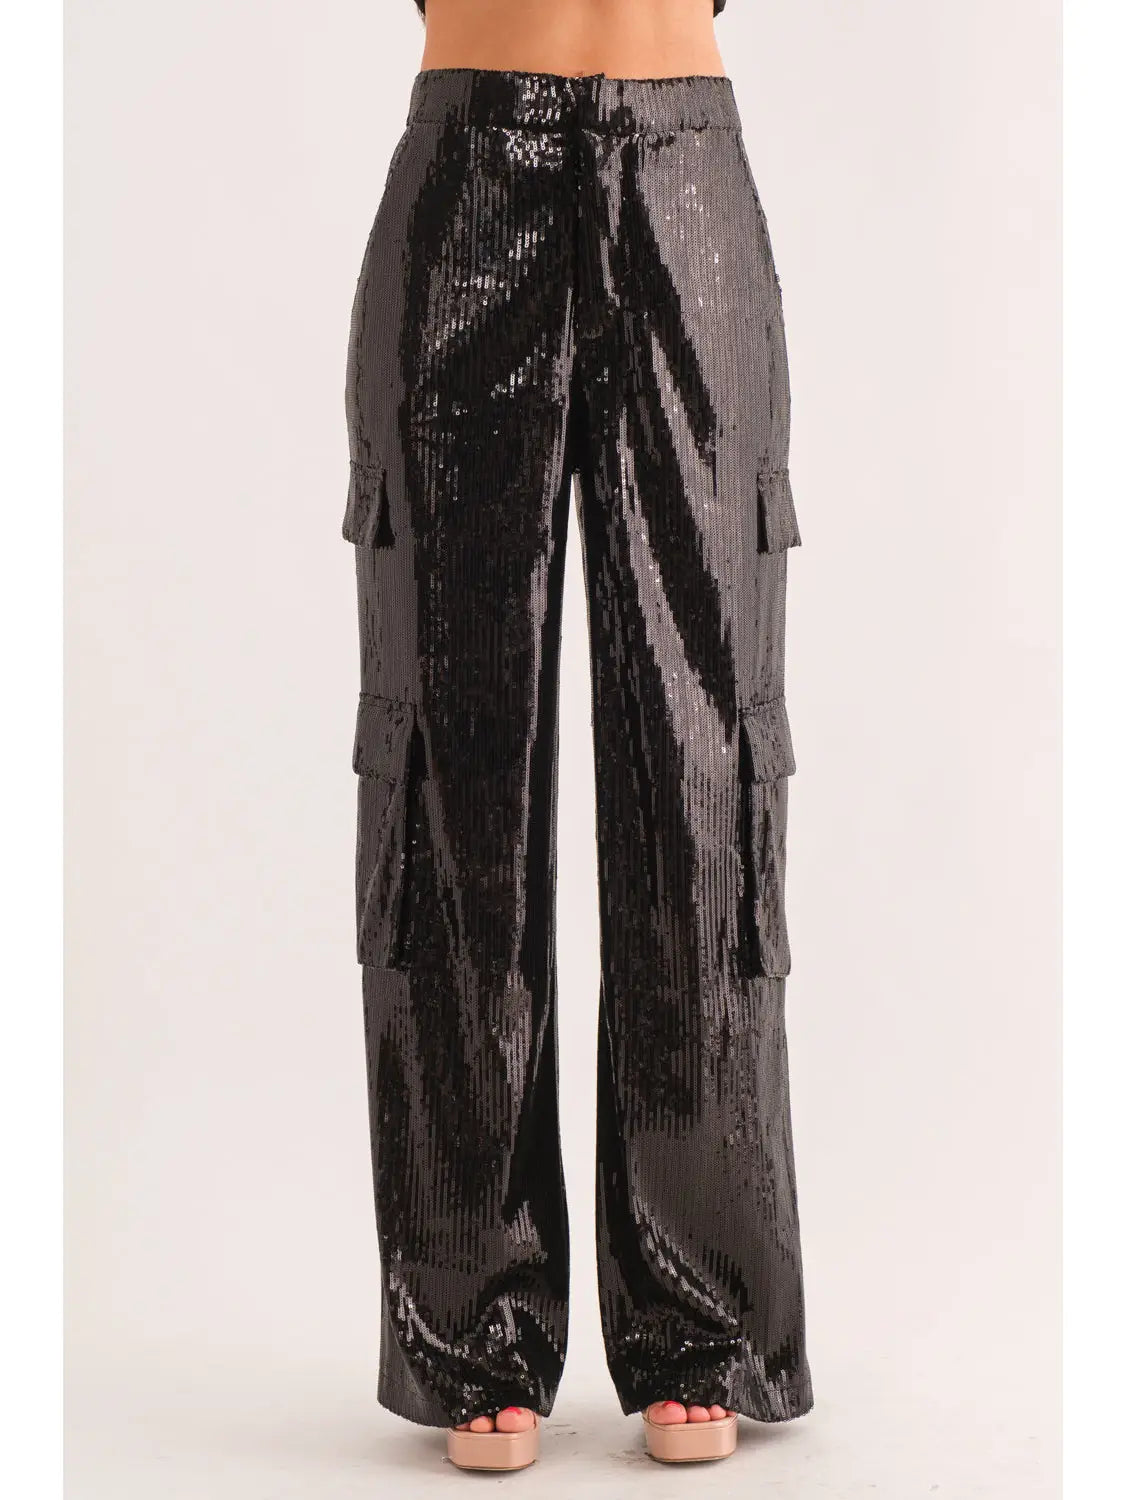 Sequins Cargo Trousers with Side Flap Pockets